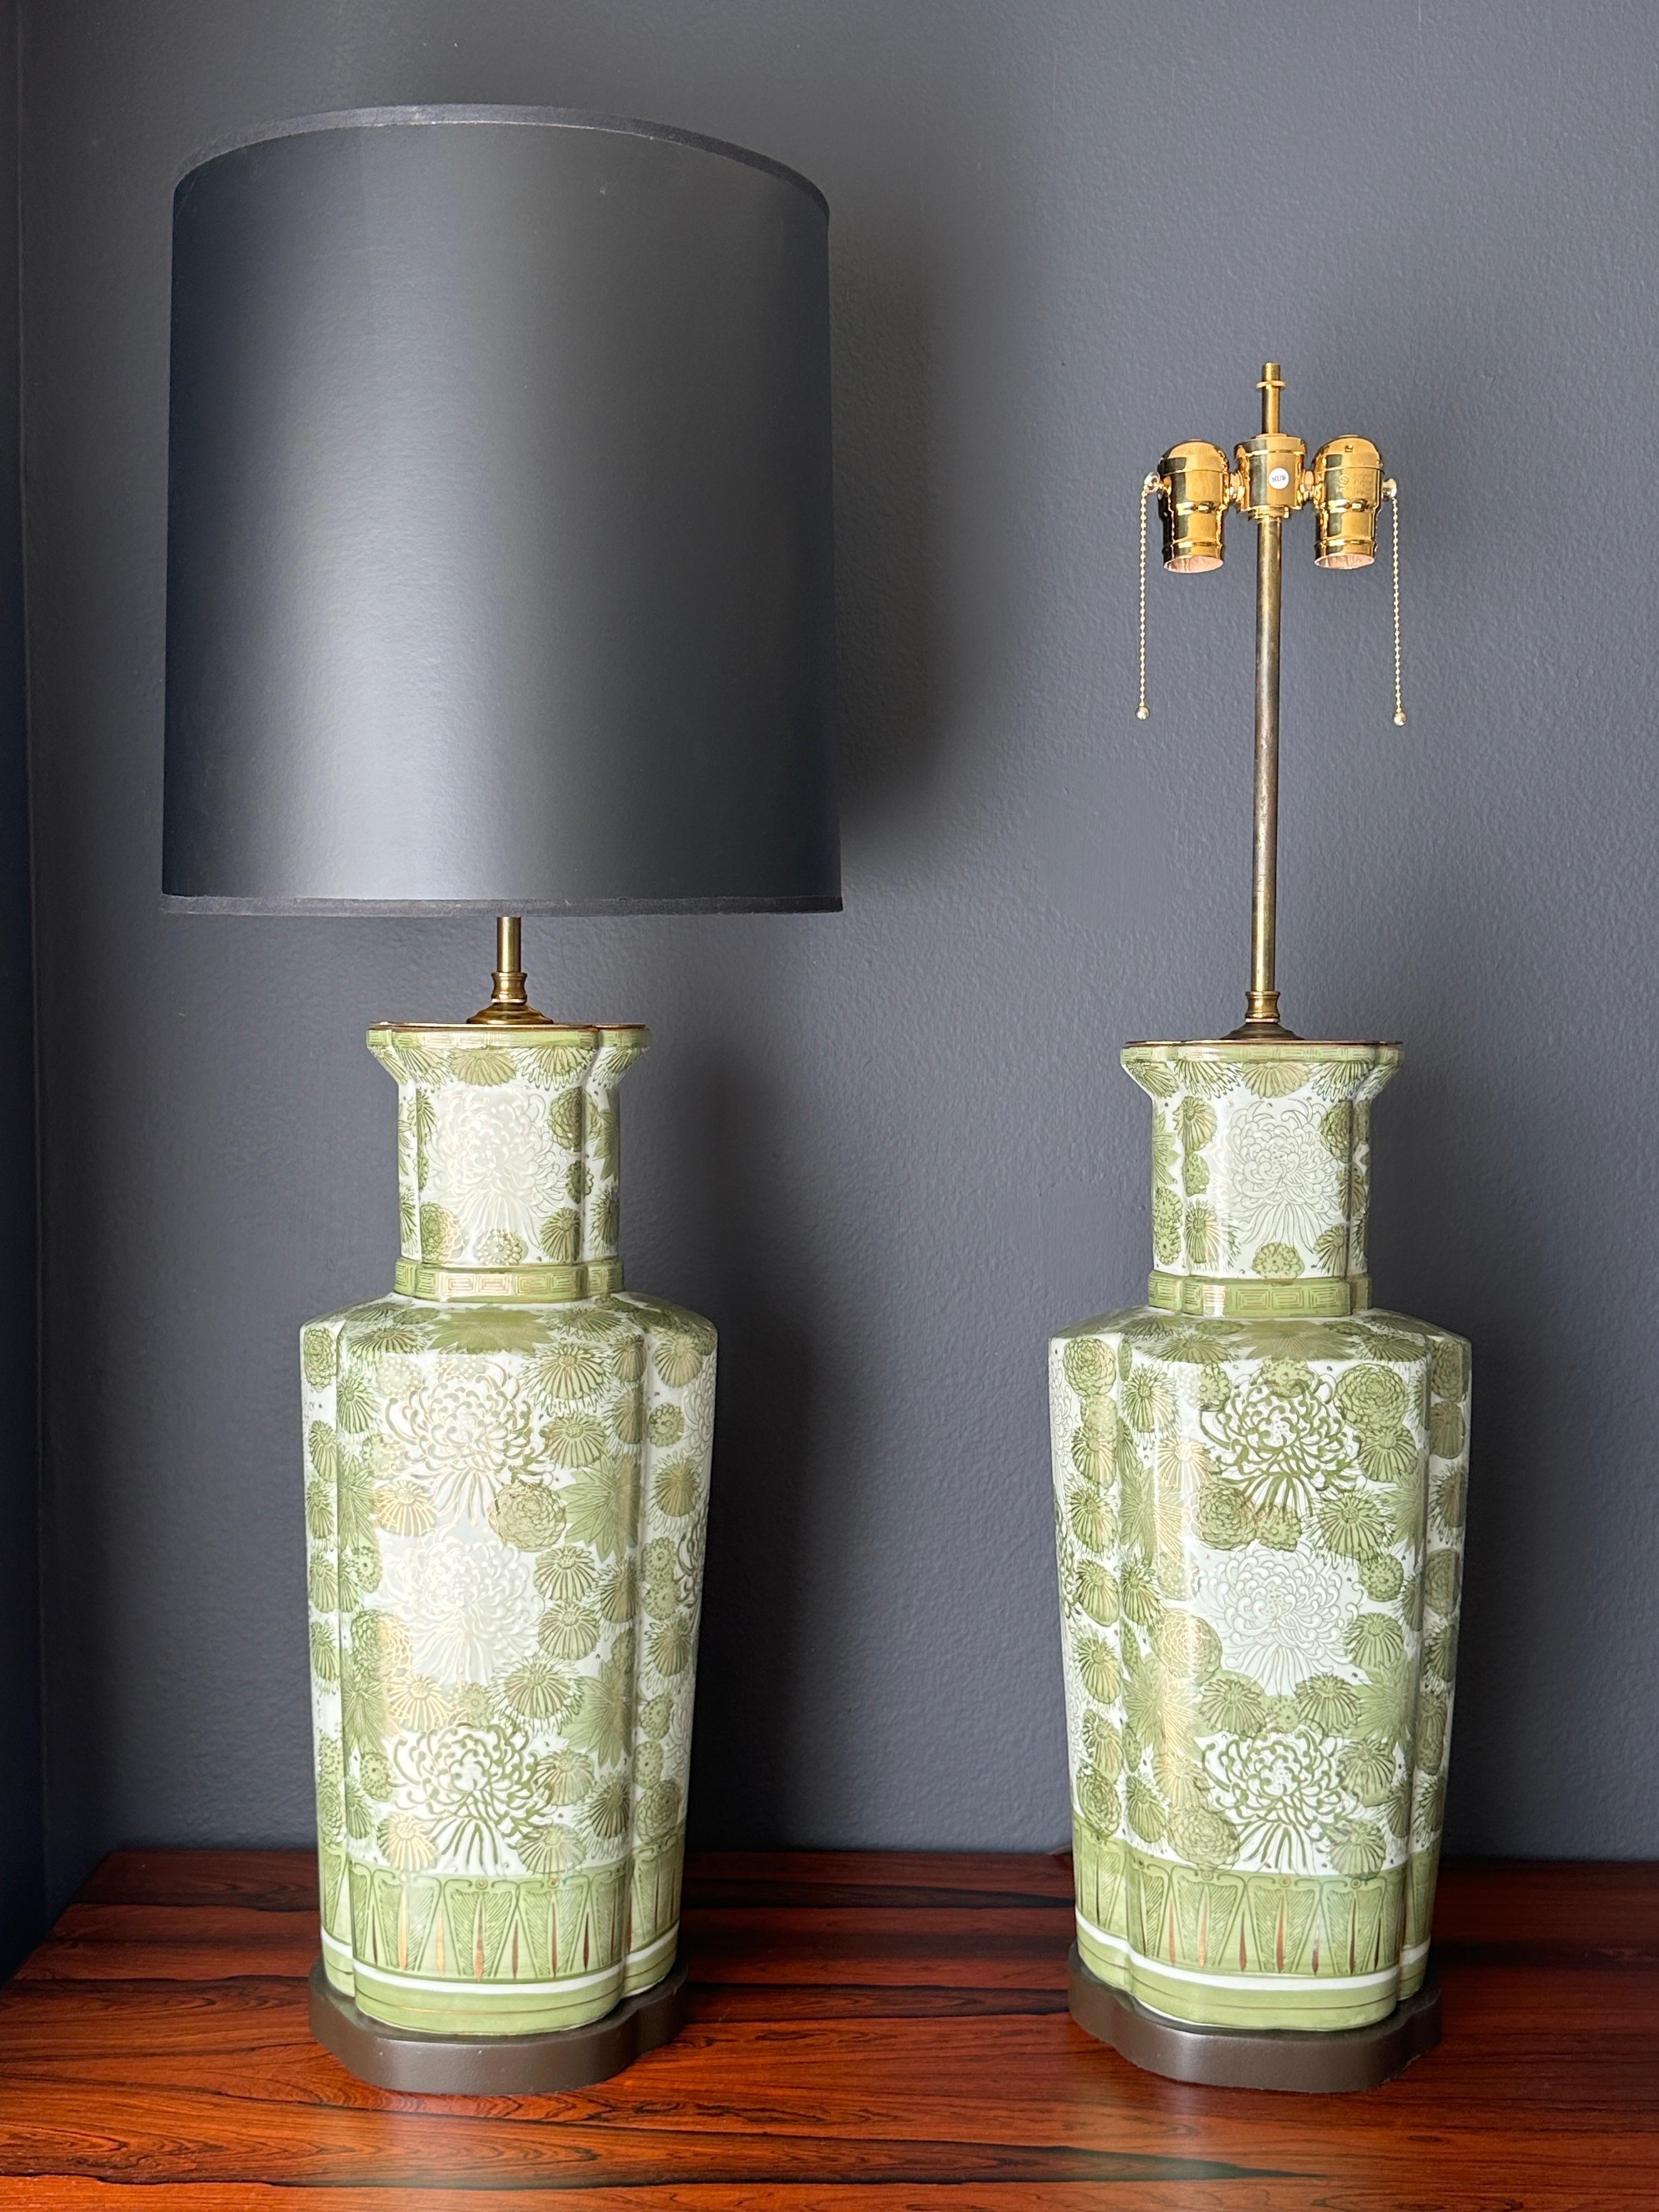 Pair of Japanese green porcelain Chinoiserie motif lamps for Marbro Lighting Co.
Requires two up to 60watt bulbs.